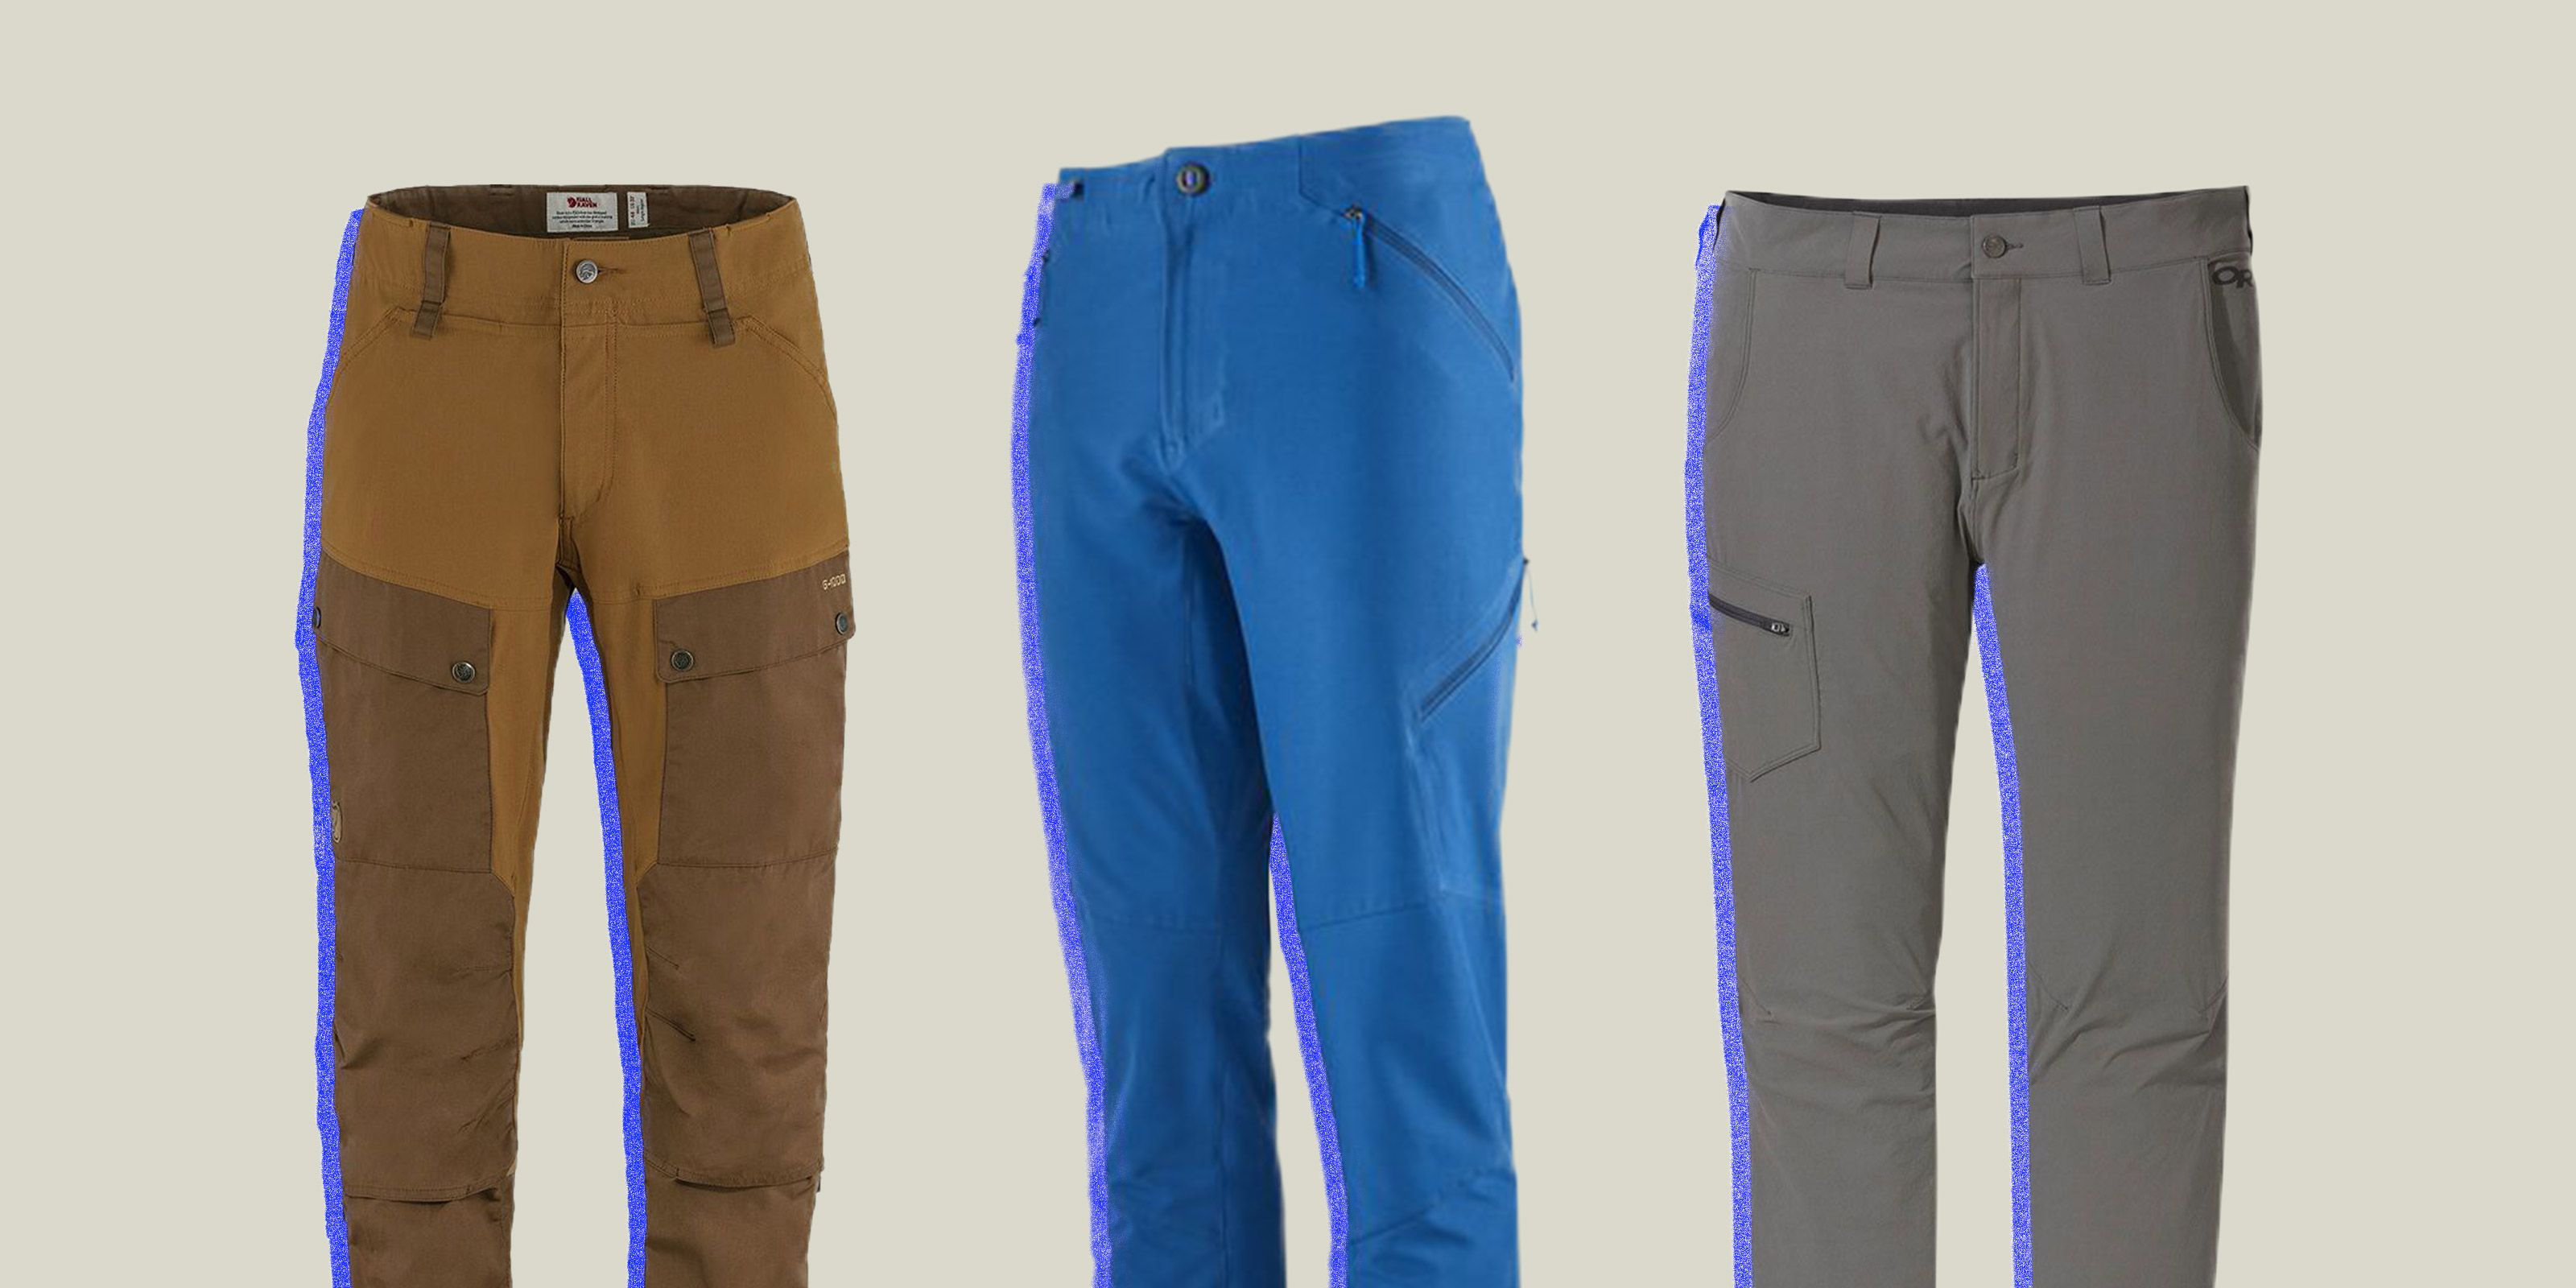 Erase Blueprint Beaten truck The Best Pants for Winter Hiking to Stay Dry and Warm